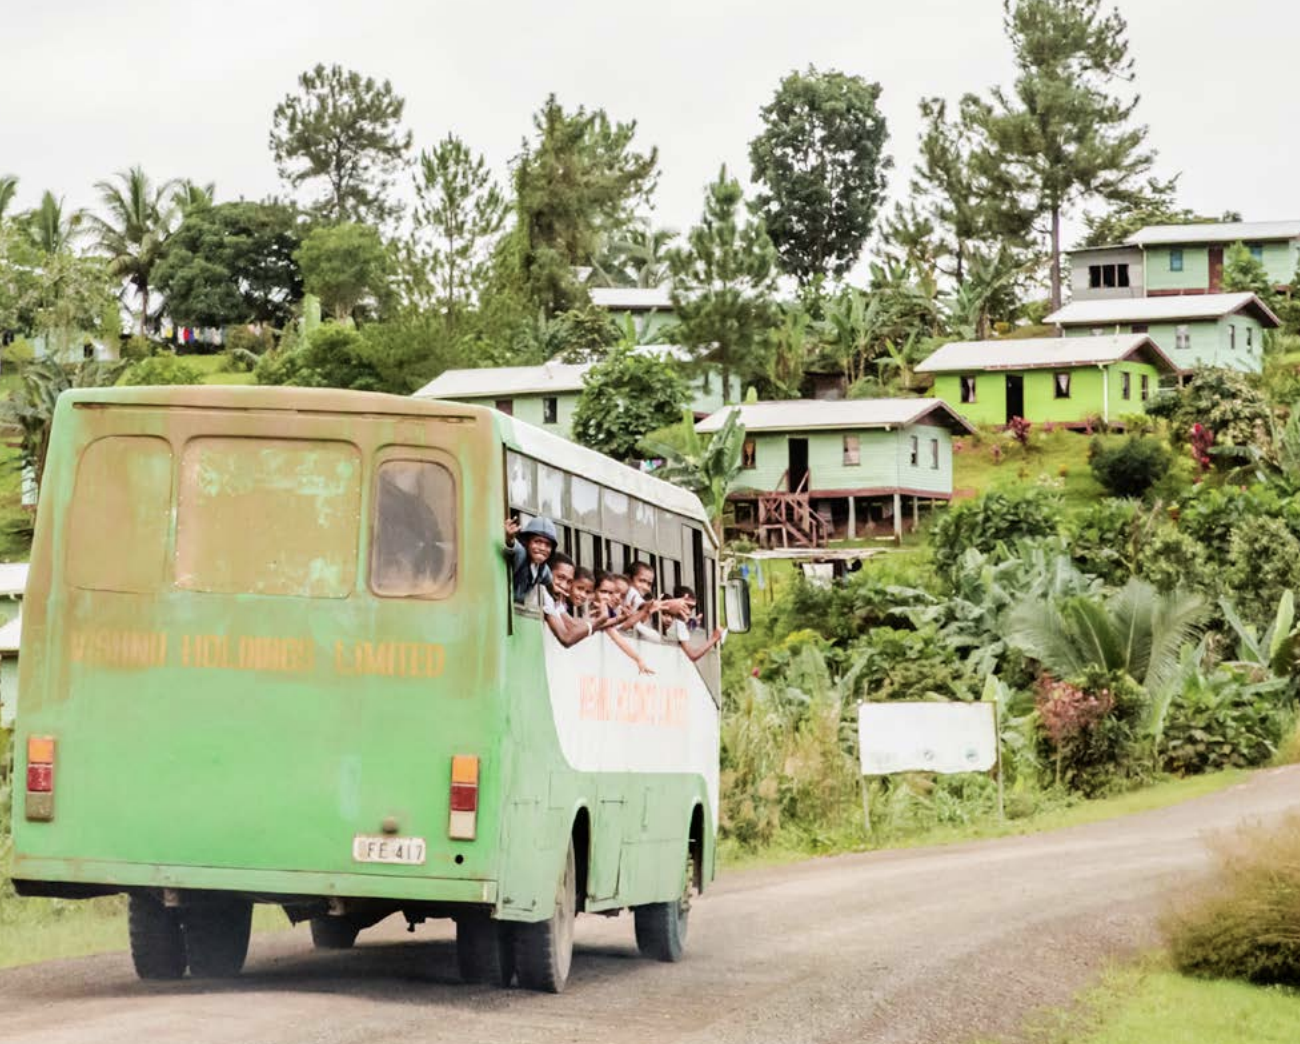 A green bus with children waving from the windows going past green settlements and trees